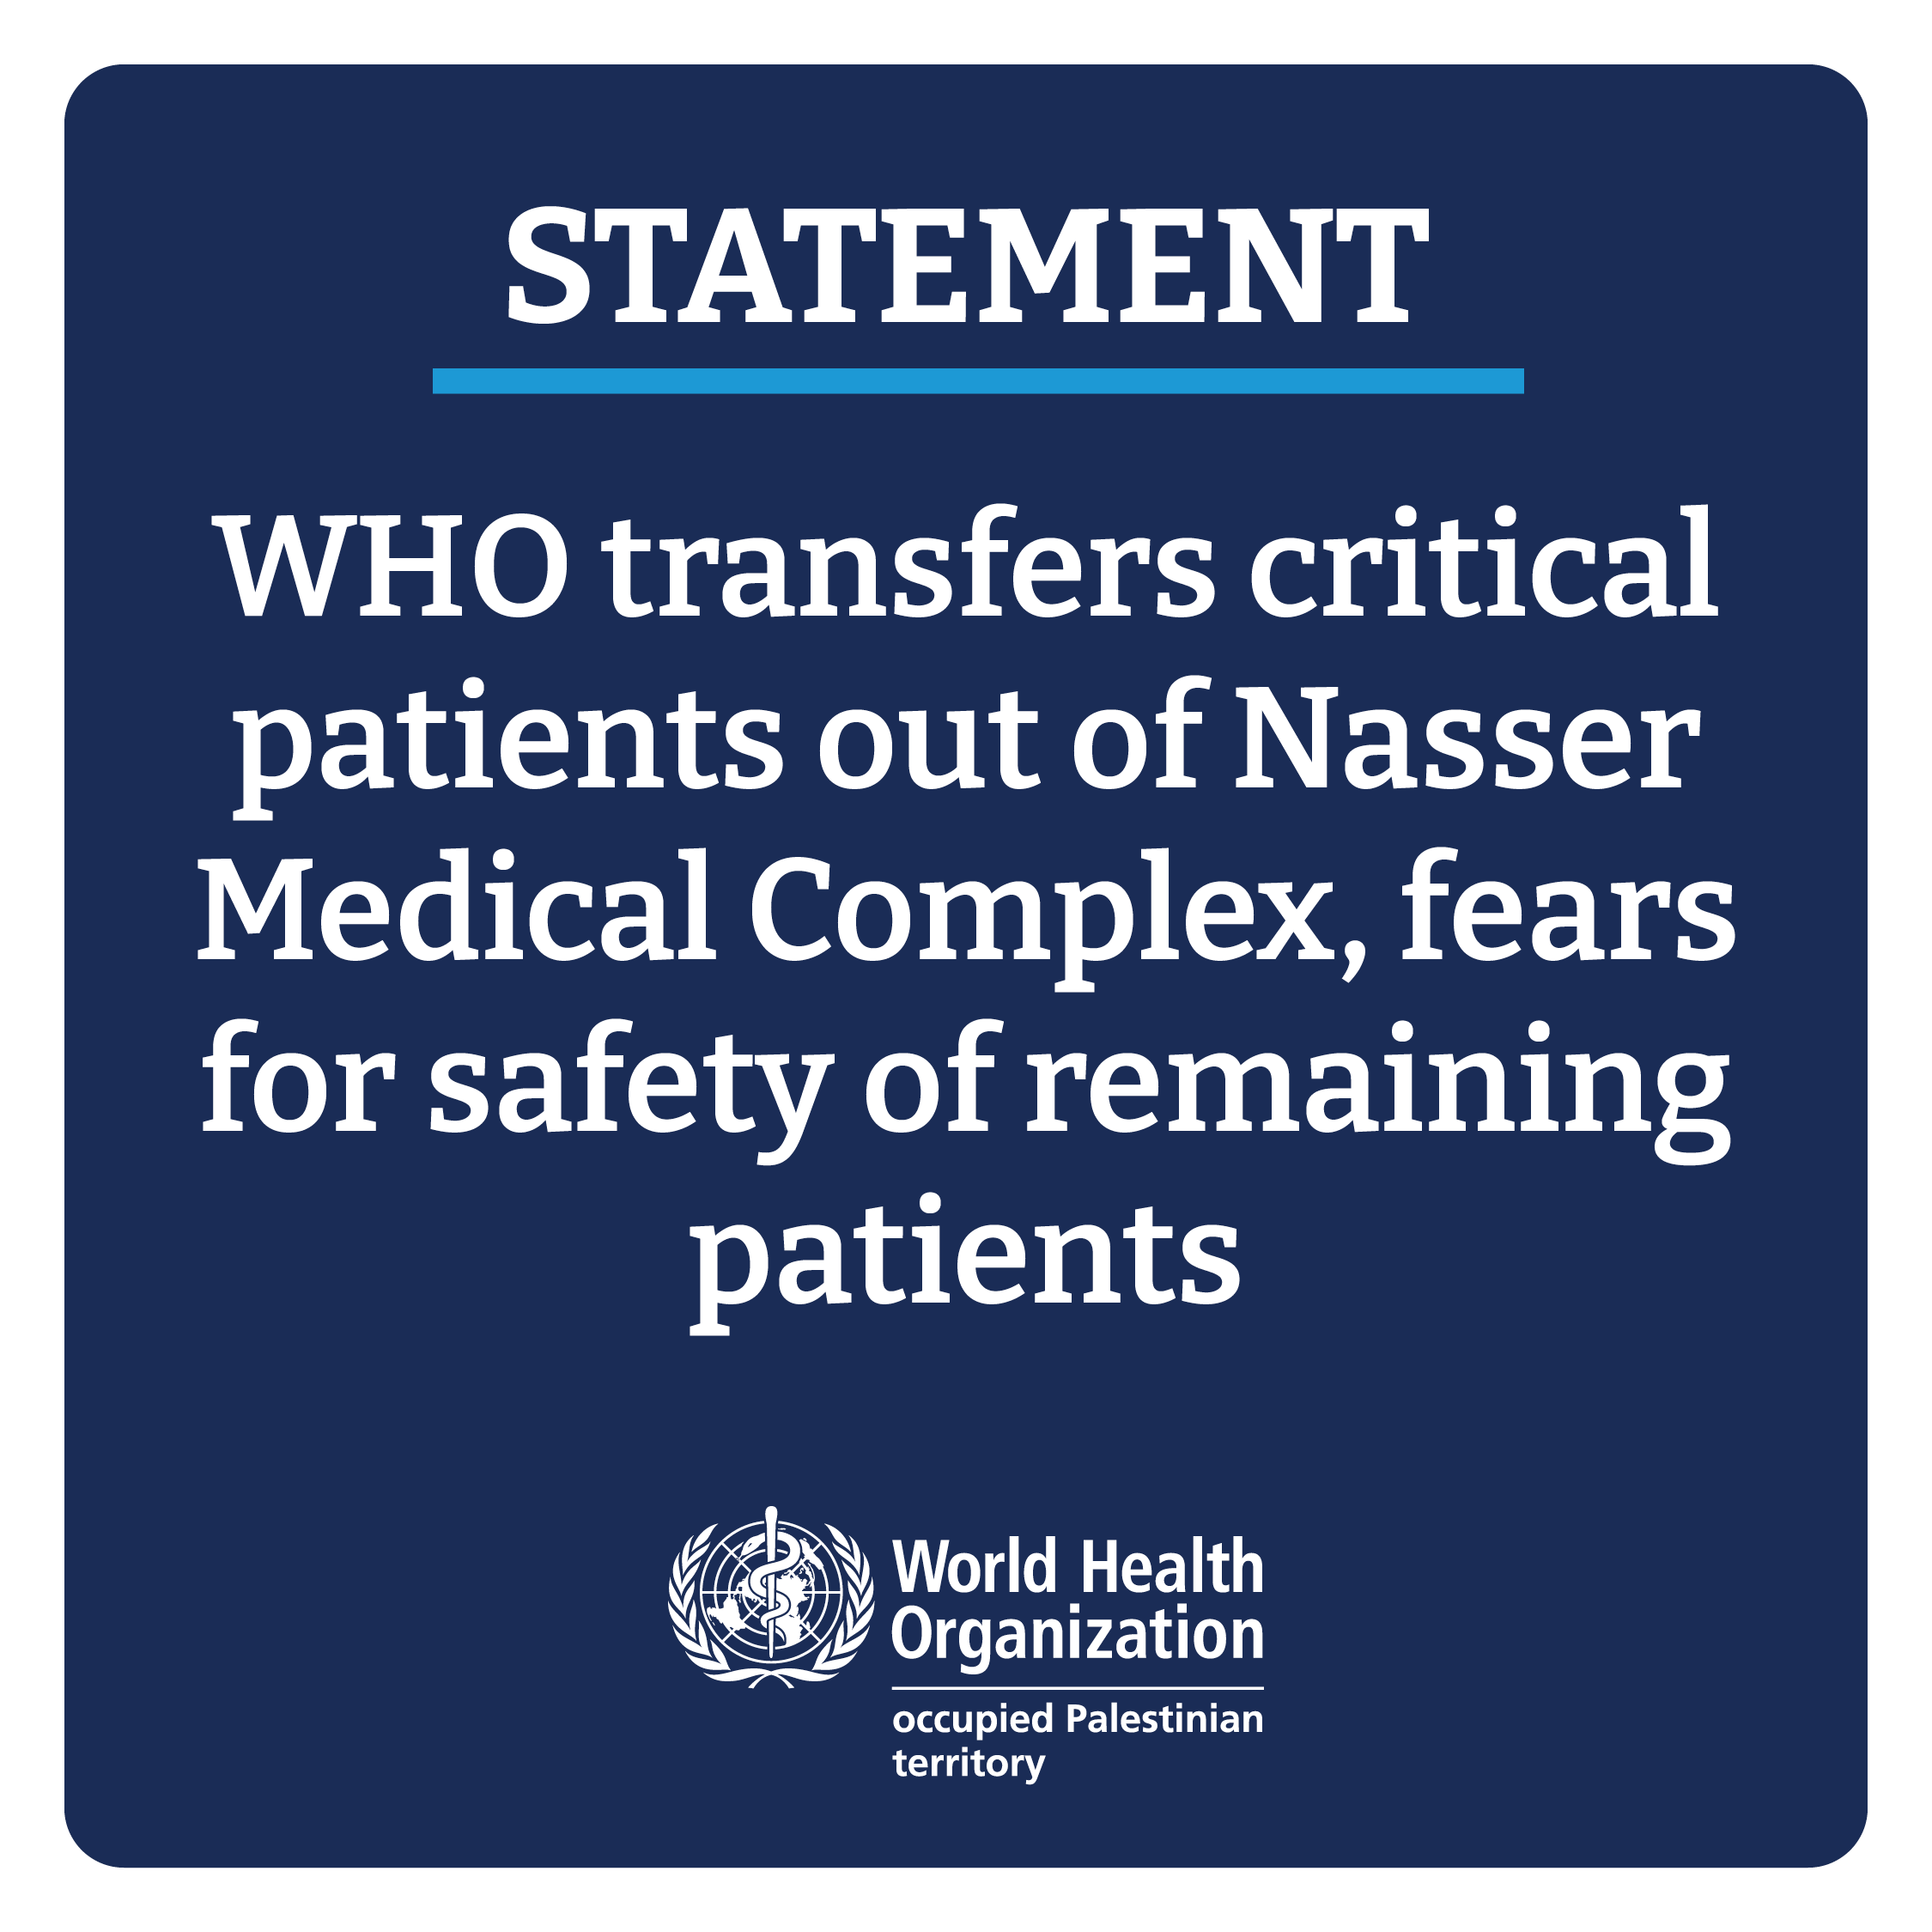 Statement: WHO transfer critical patients out of Nasser Medical Complex, fears for safety of remaining patients